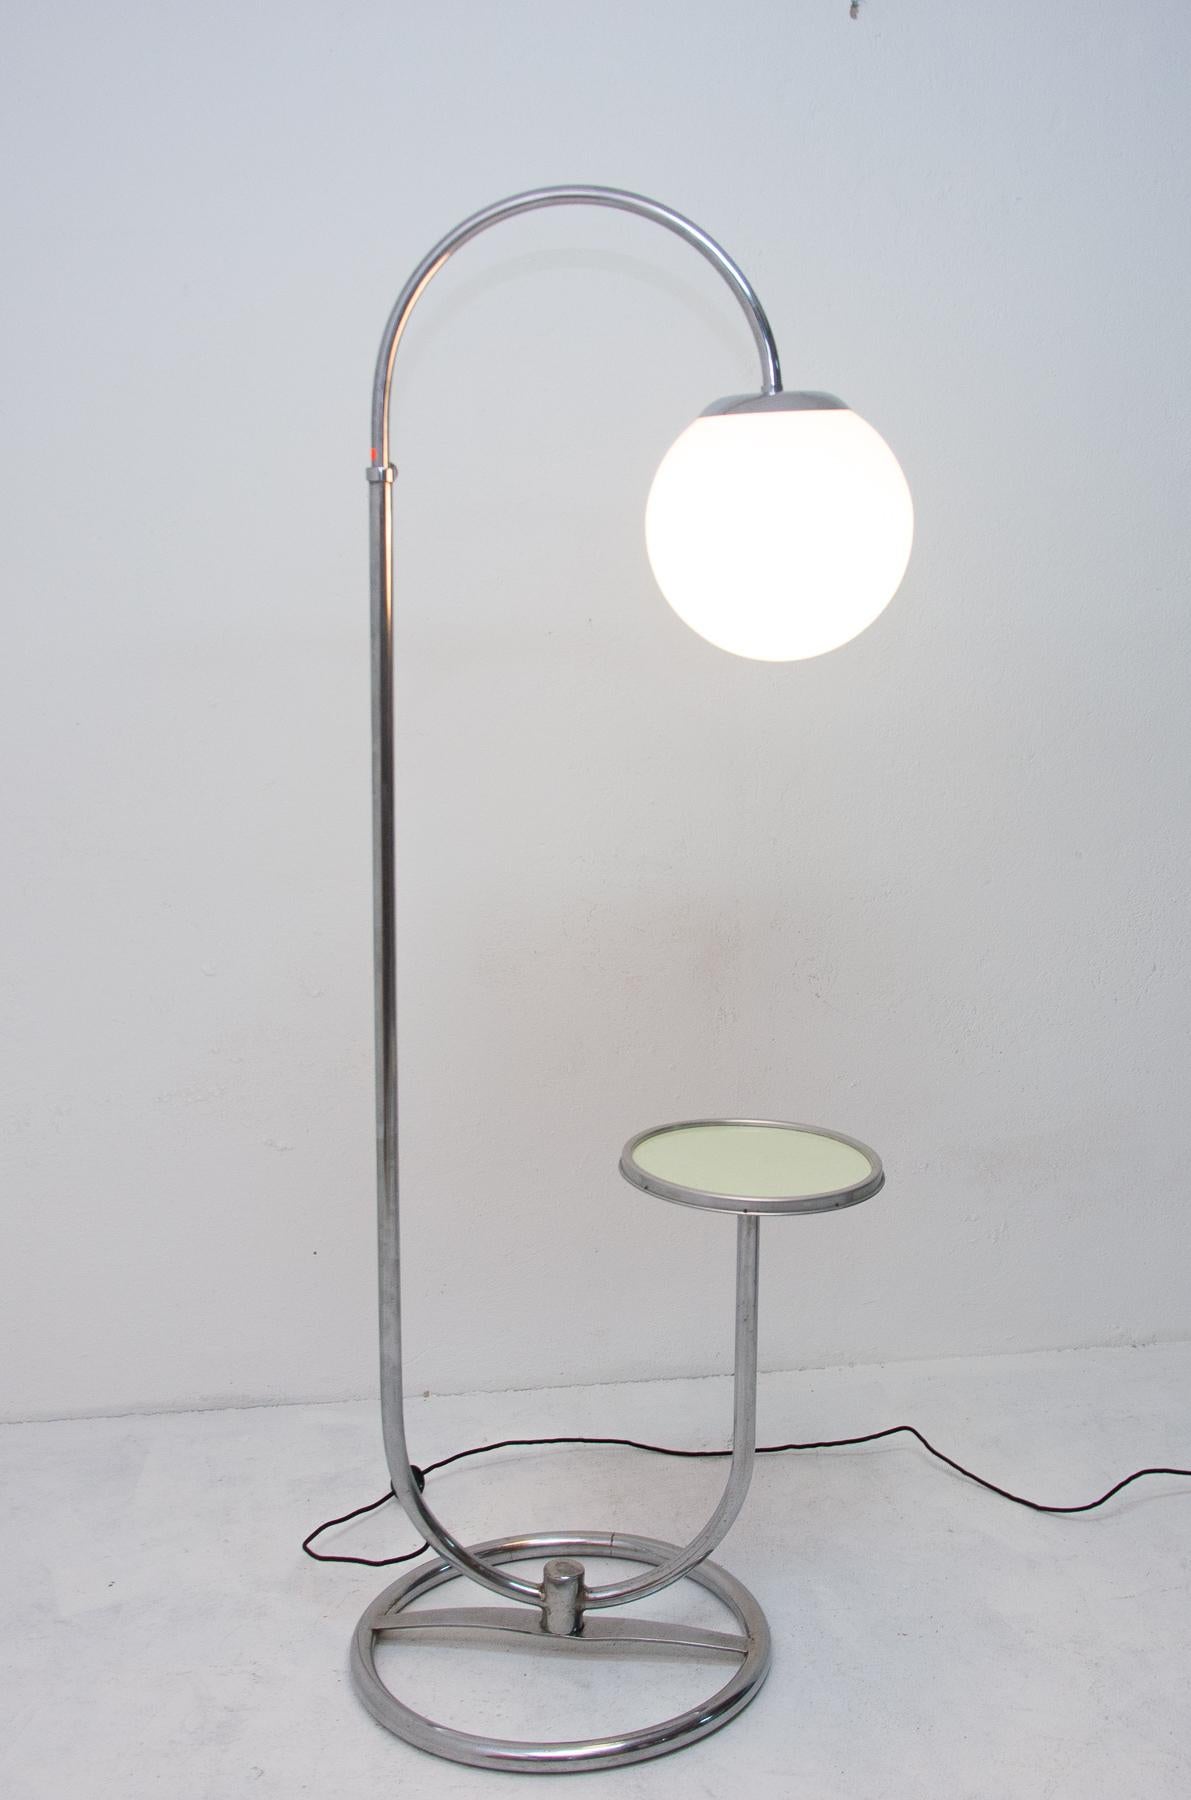 This Bauhaus floor lamp was designed by Robert Slezak in the 1930s for the famous company producing a tubular furniture 